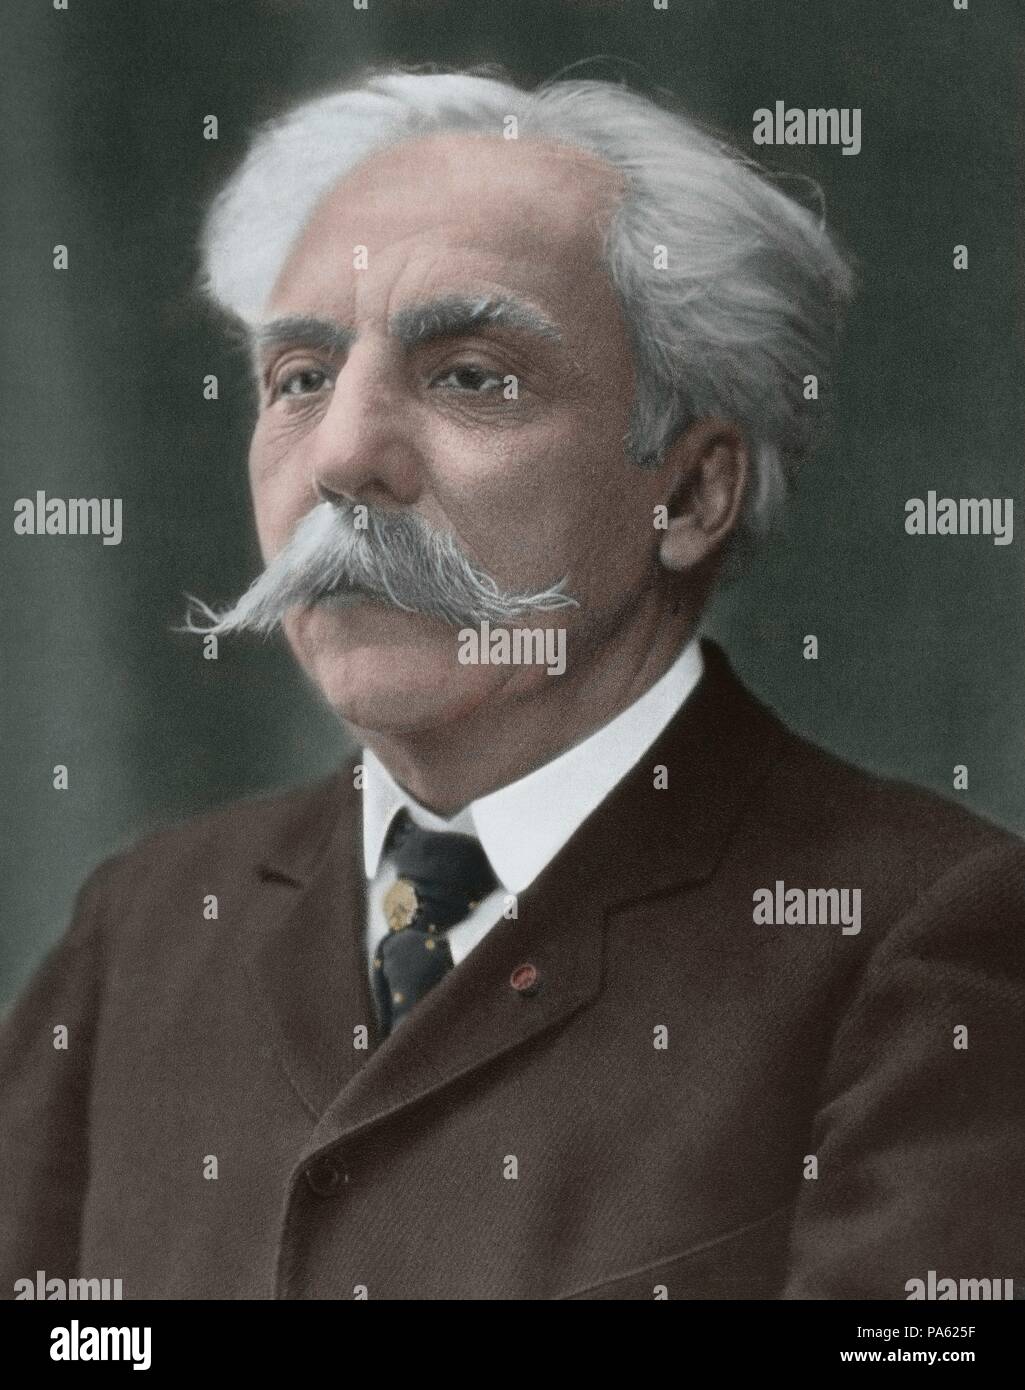 Gabriel Faure(1845-1924). French composer, pianist and organist. Portrait. Photography. Colored. Stock Photo